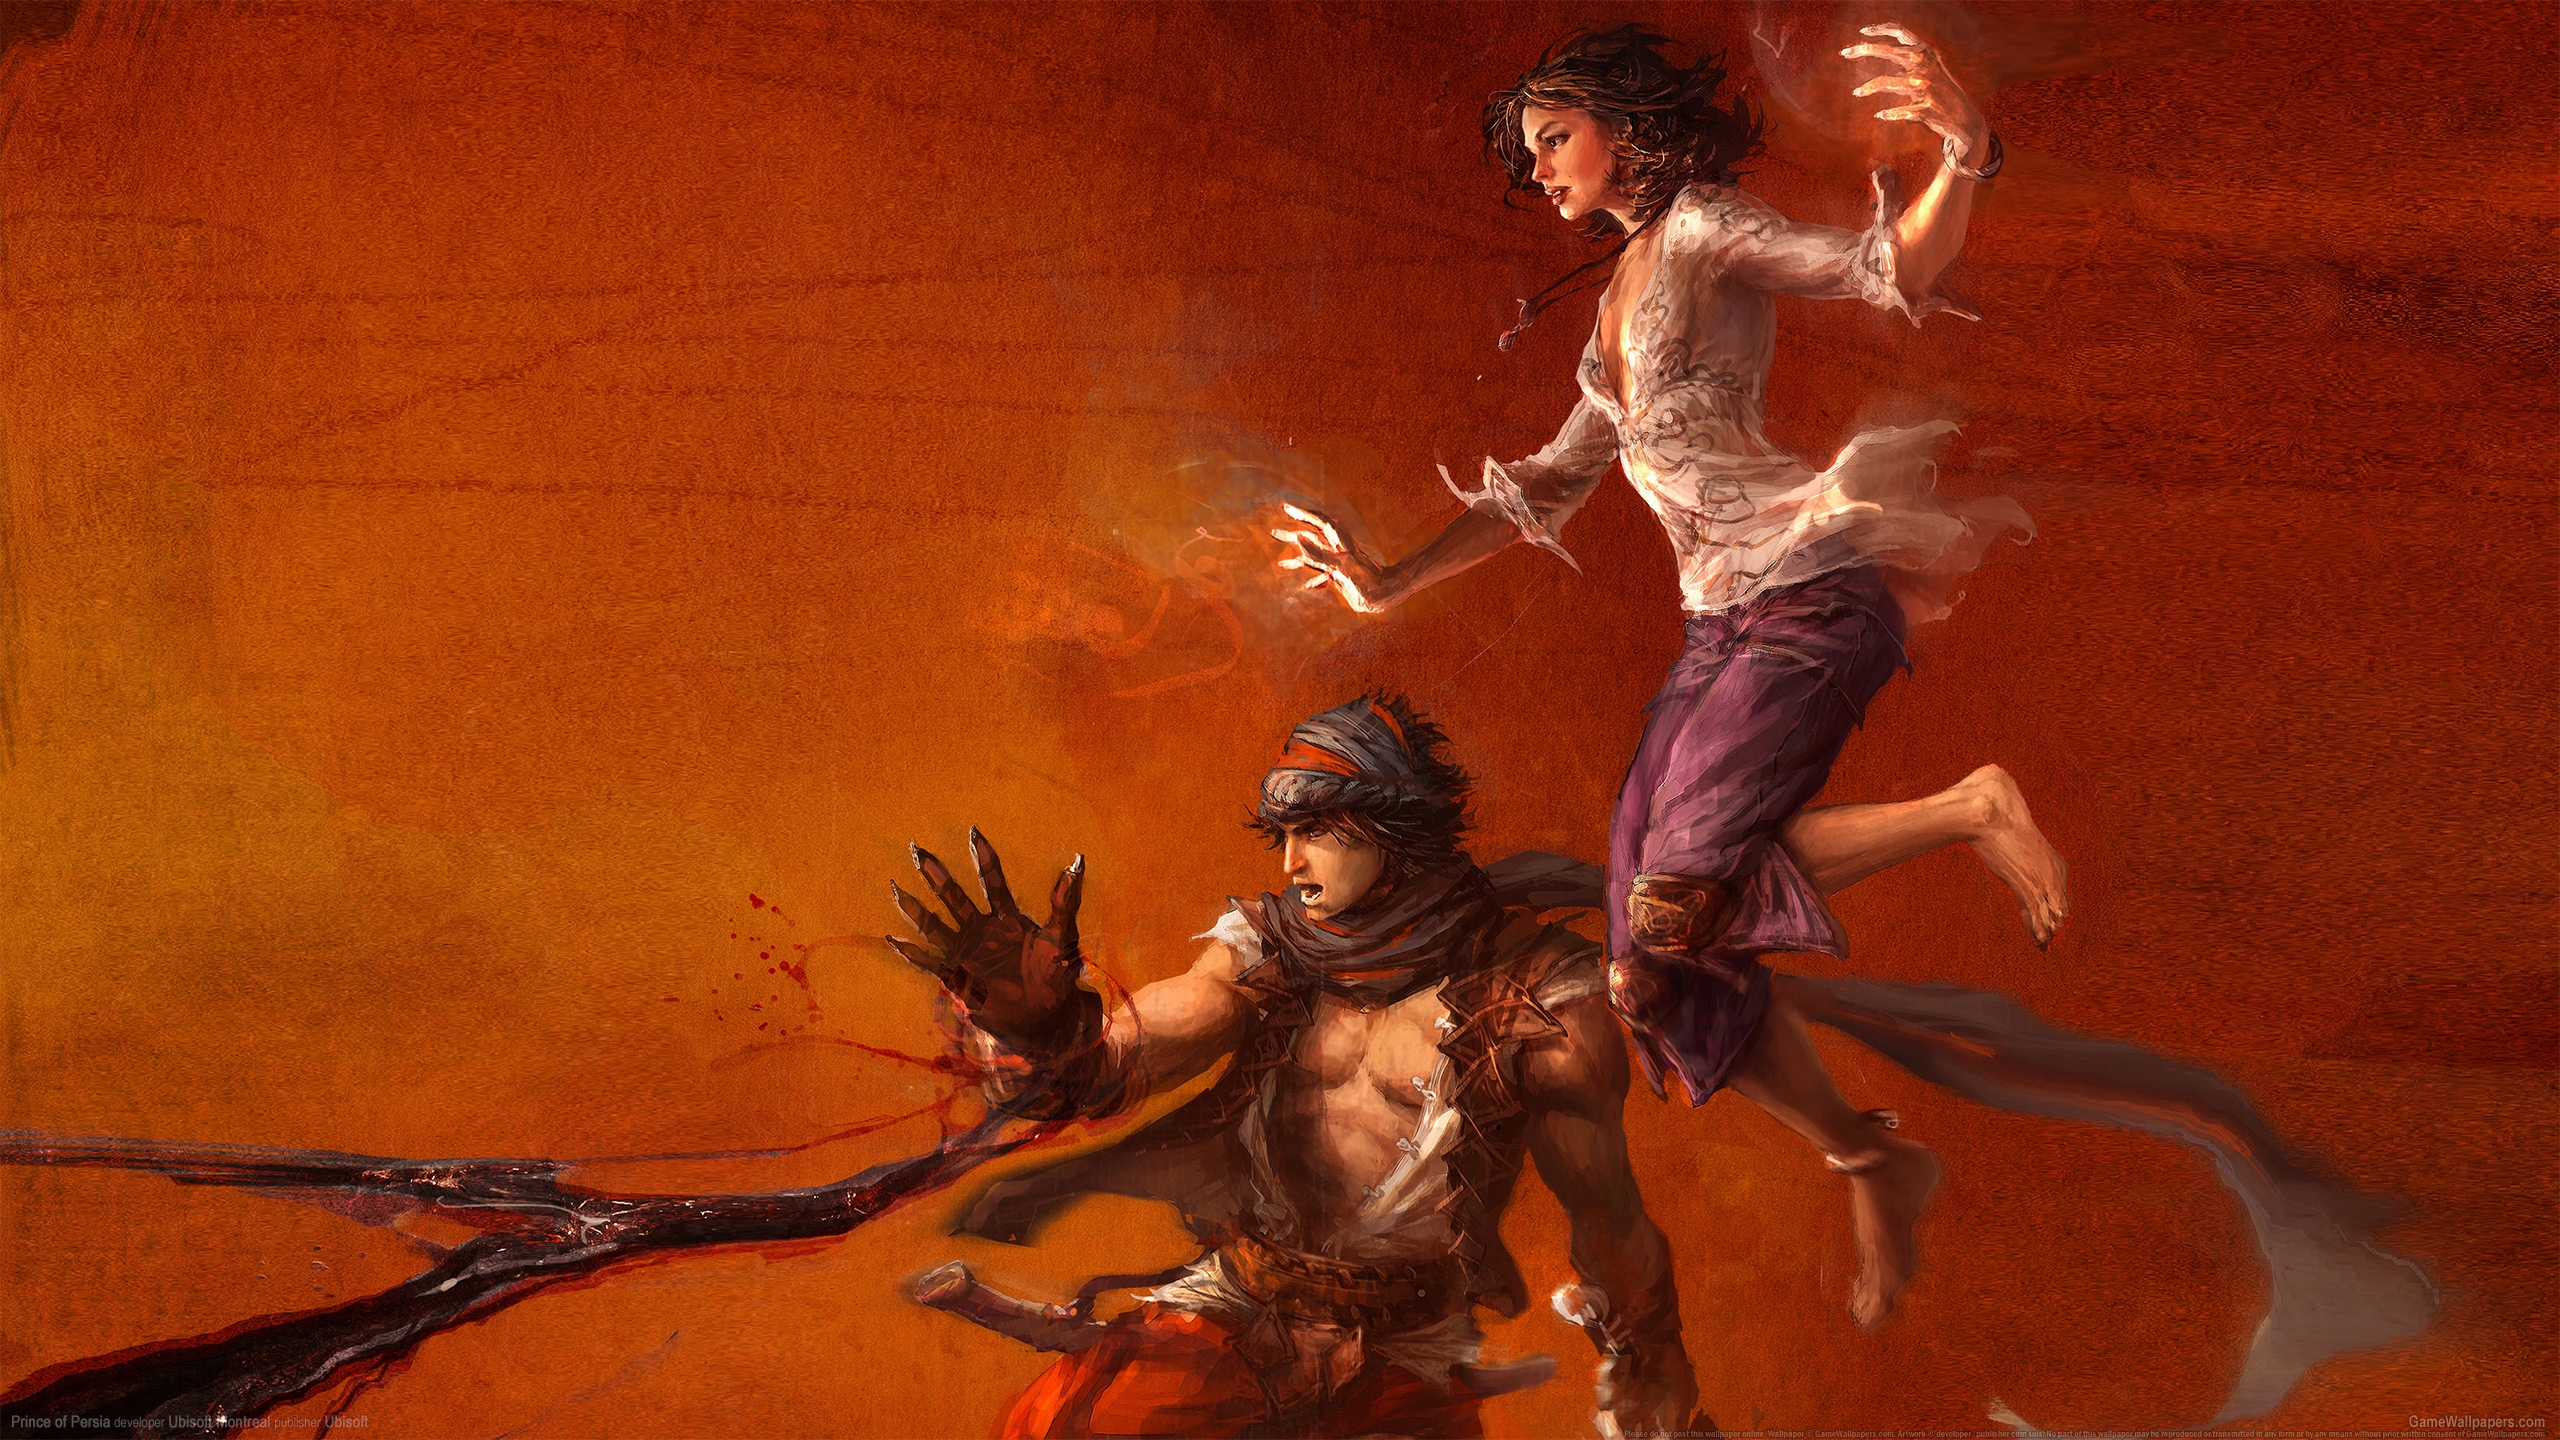 Prince of Persia 2560x1440 achtergrond 07